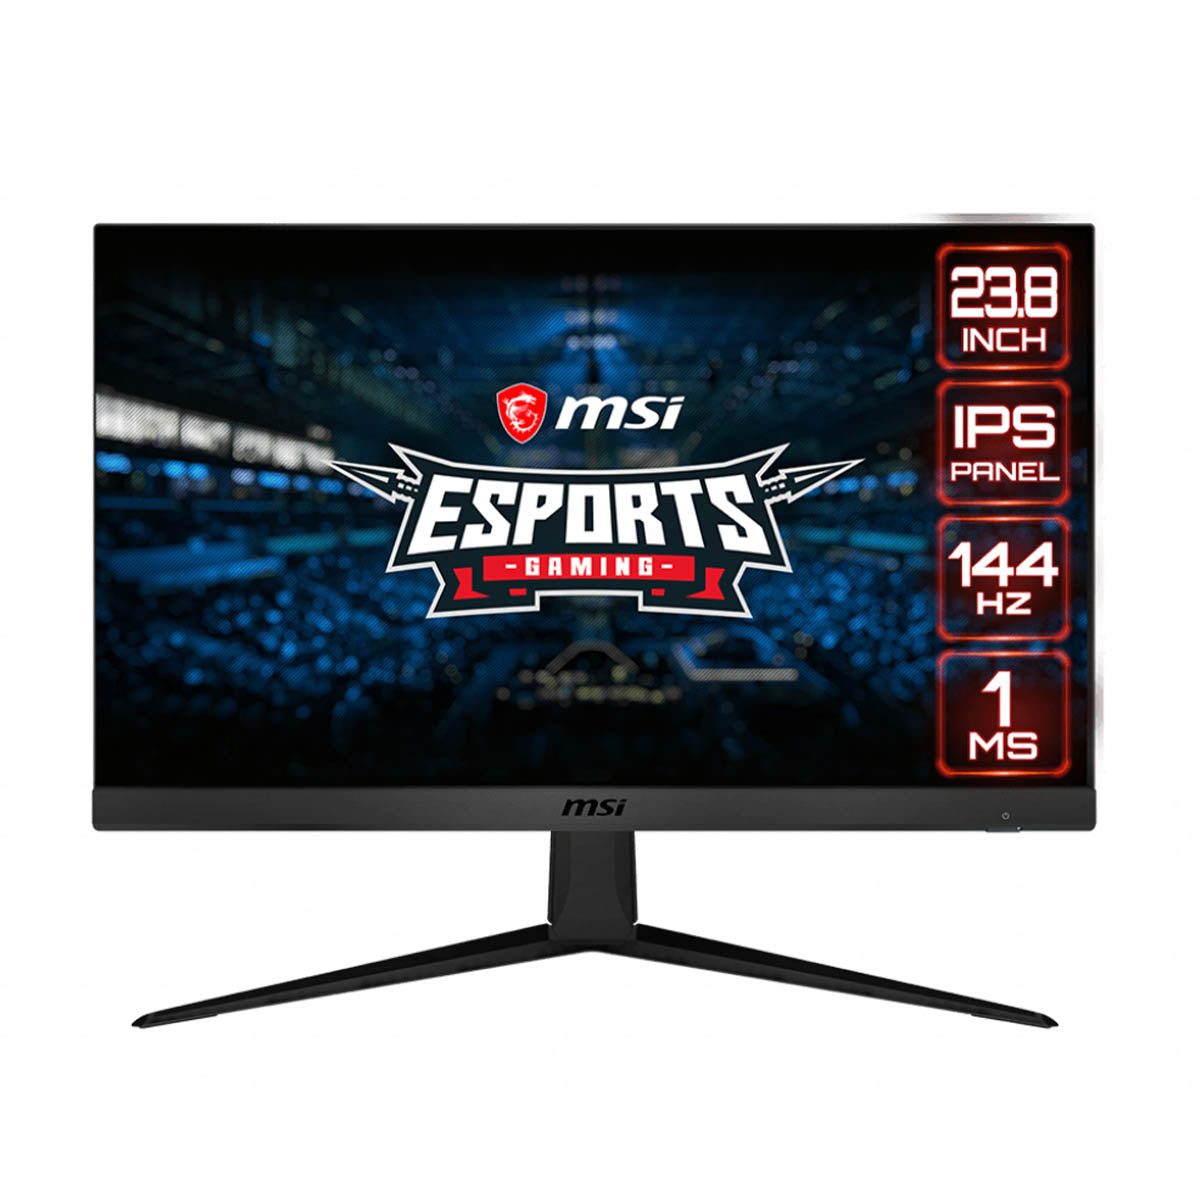 MSI Optix G241 24 Inch Full-HD IPS Panel Gaming Monitor with 144Hz Refresh Rate and AMD FreeSync